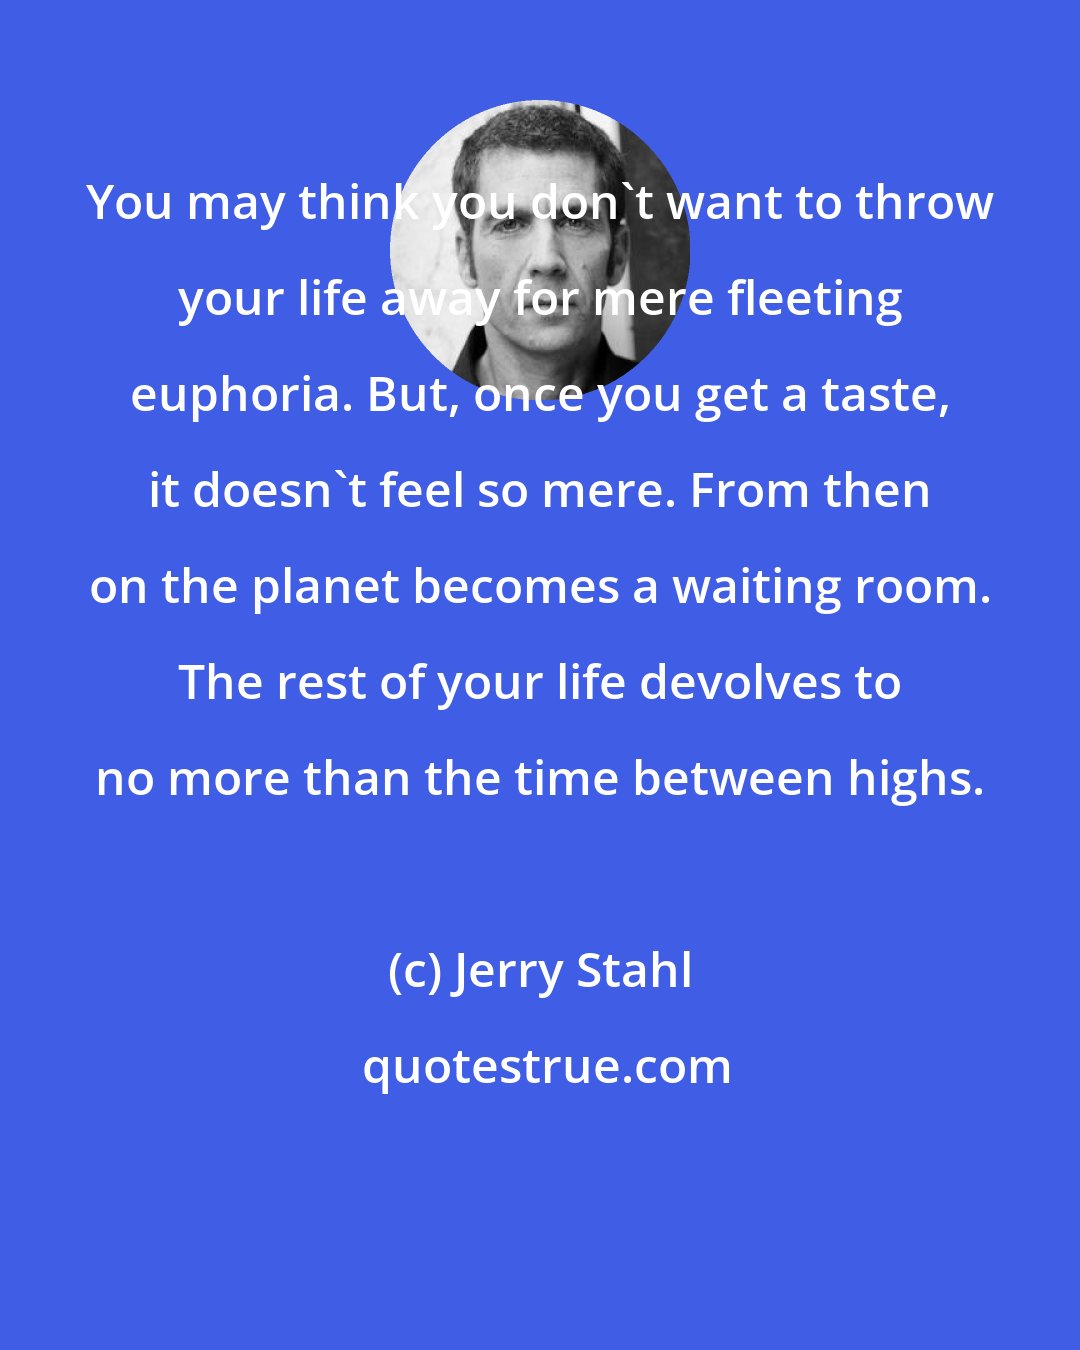 Jerry Stahl: You may think you don't want to throw your life away for mere fleeting euphoria. But, once you get a taste, it doesn't feel so mere. From then on the planet becomes a waiting room. The rest of your life devolves to no more than the time between highs.